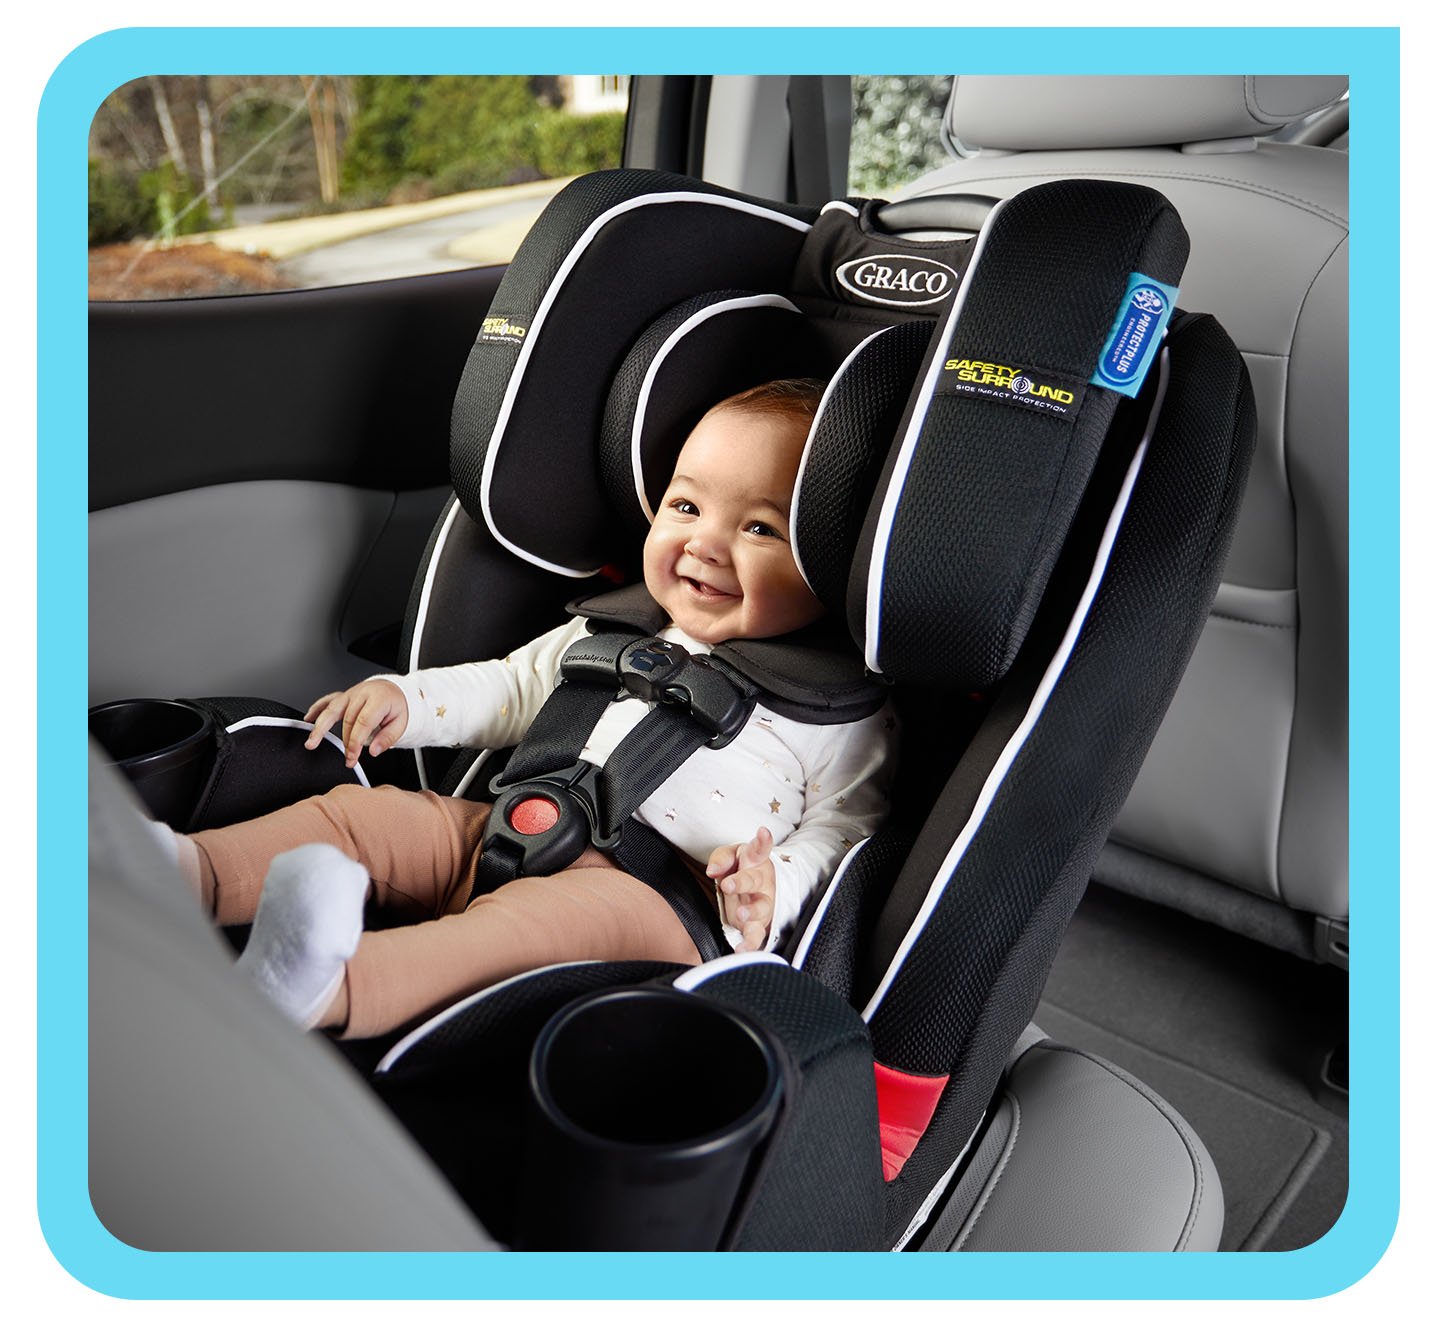 Graco S Car Seat Safety Standards - What Infant Car Seat Has The Highest Safety Rating